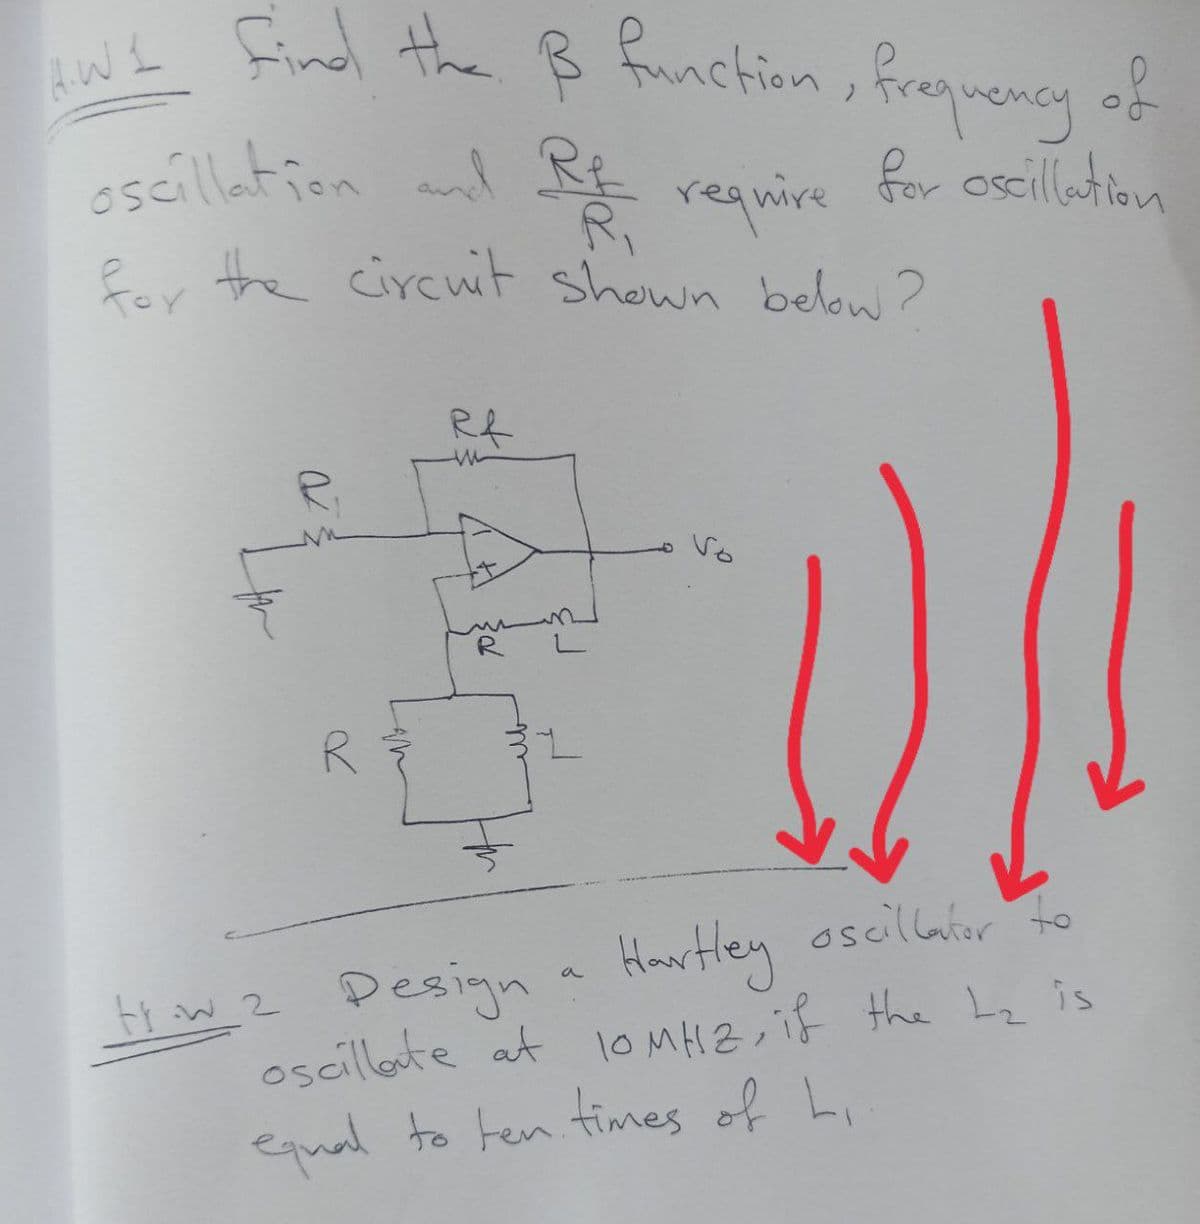 oscillation and R
wL find the B Rnction, frequency of
esailation al Rt regnire
Ri
Eor the circuit shown below ?
for oscillation
R
H w z Designa Hartley oscillaror to
oscillote at loMH2,if the Lz is
equal to ten times of Li
11
